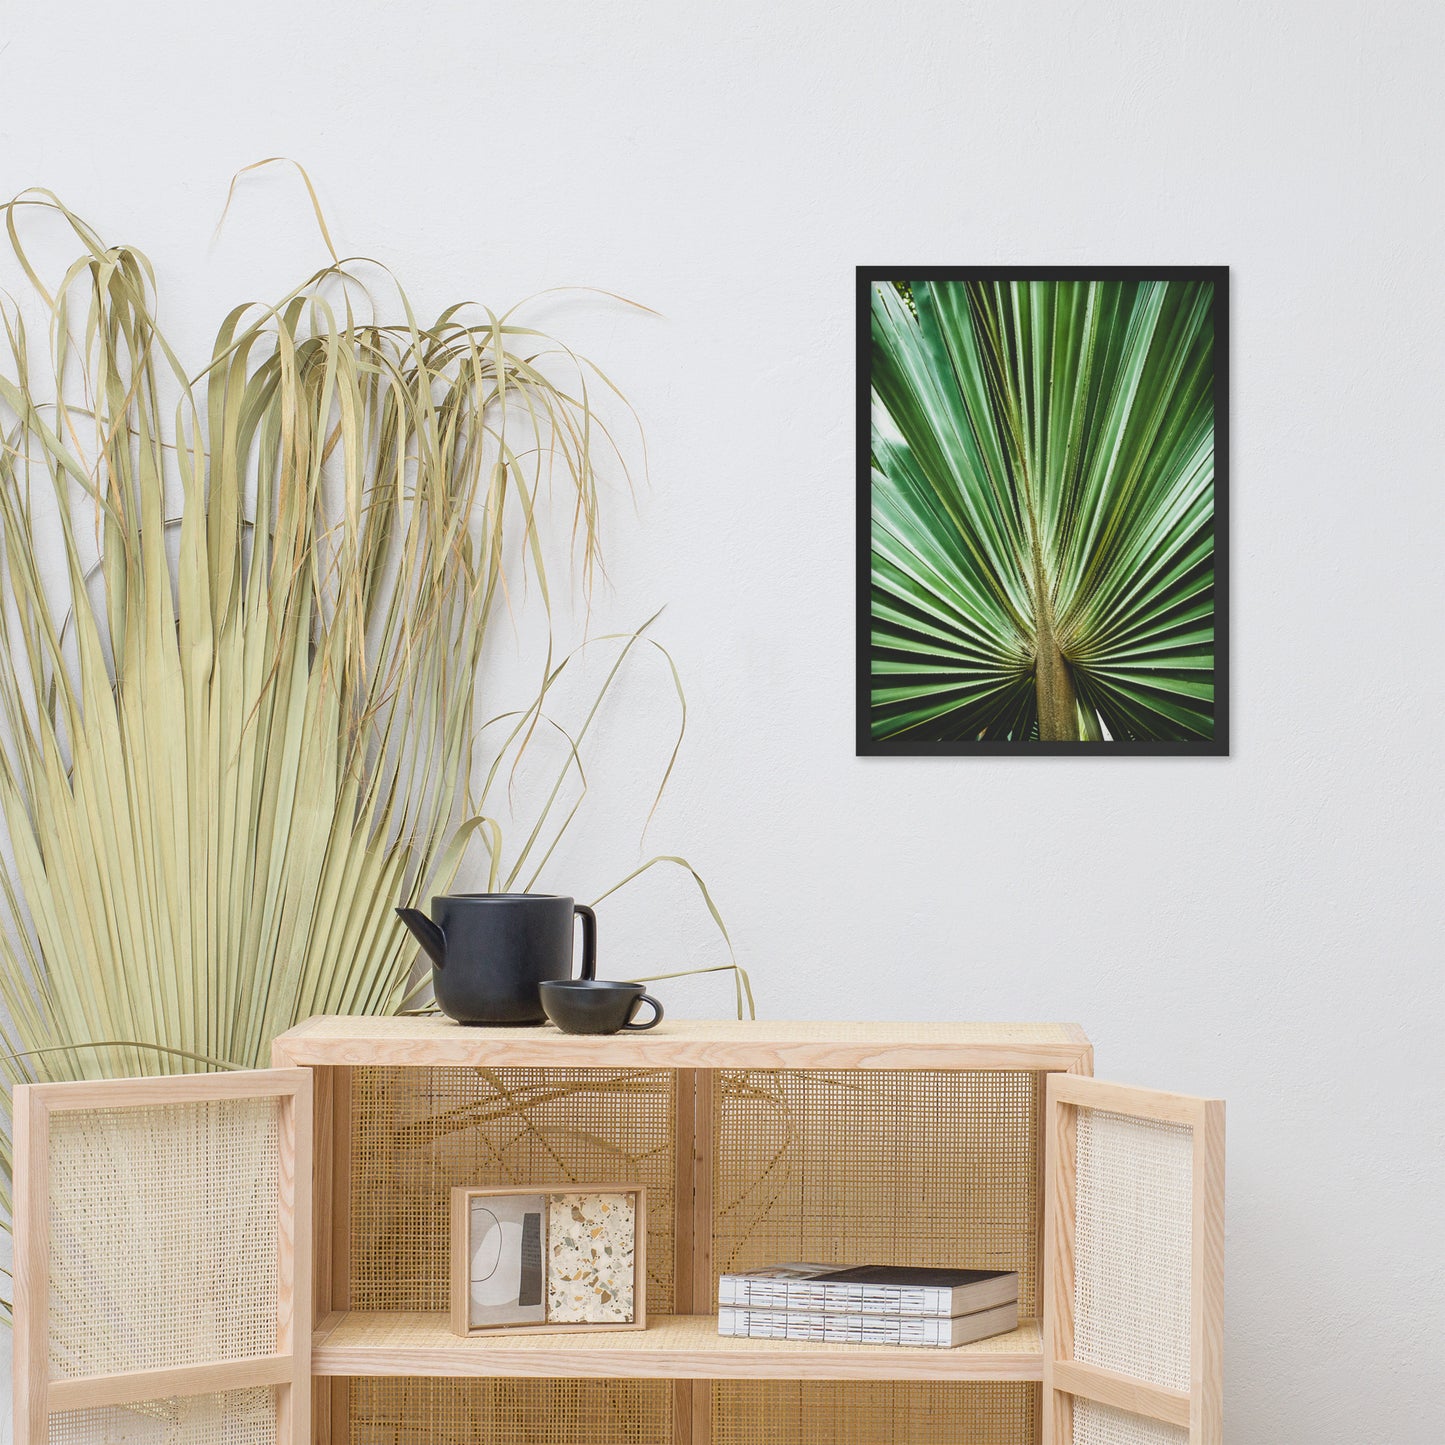 Framed Wall Pictures For Dining Room: Aged and Colorized Wide Palm Leaves 2 Tropical Botanical / Nature Photo Framed Wall Art Print - Artwork - Wall Decor